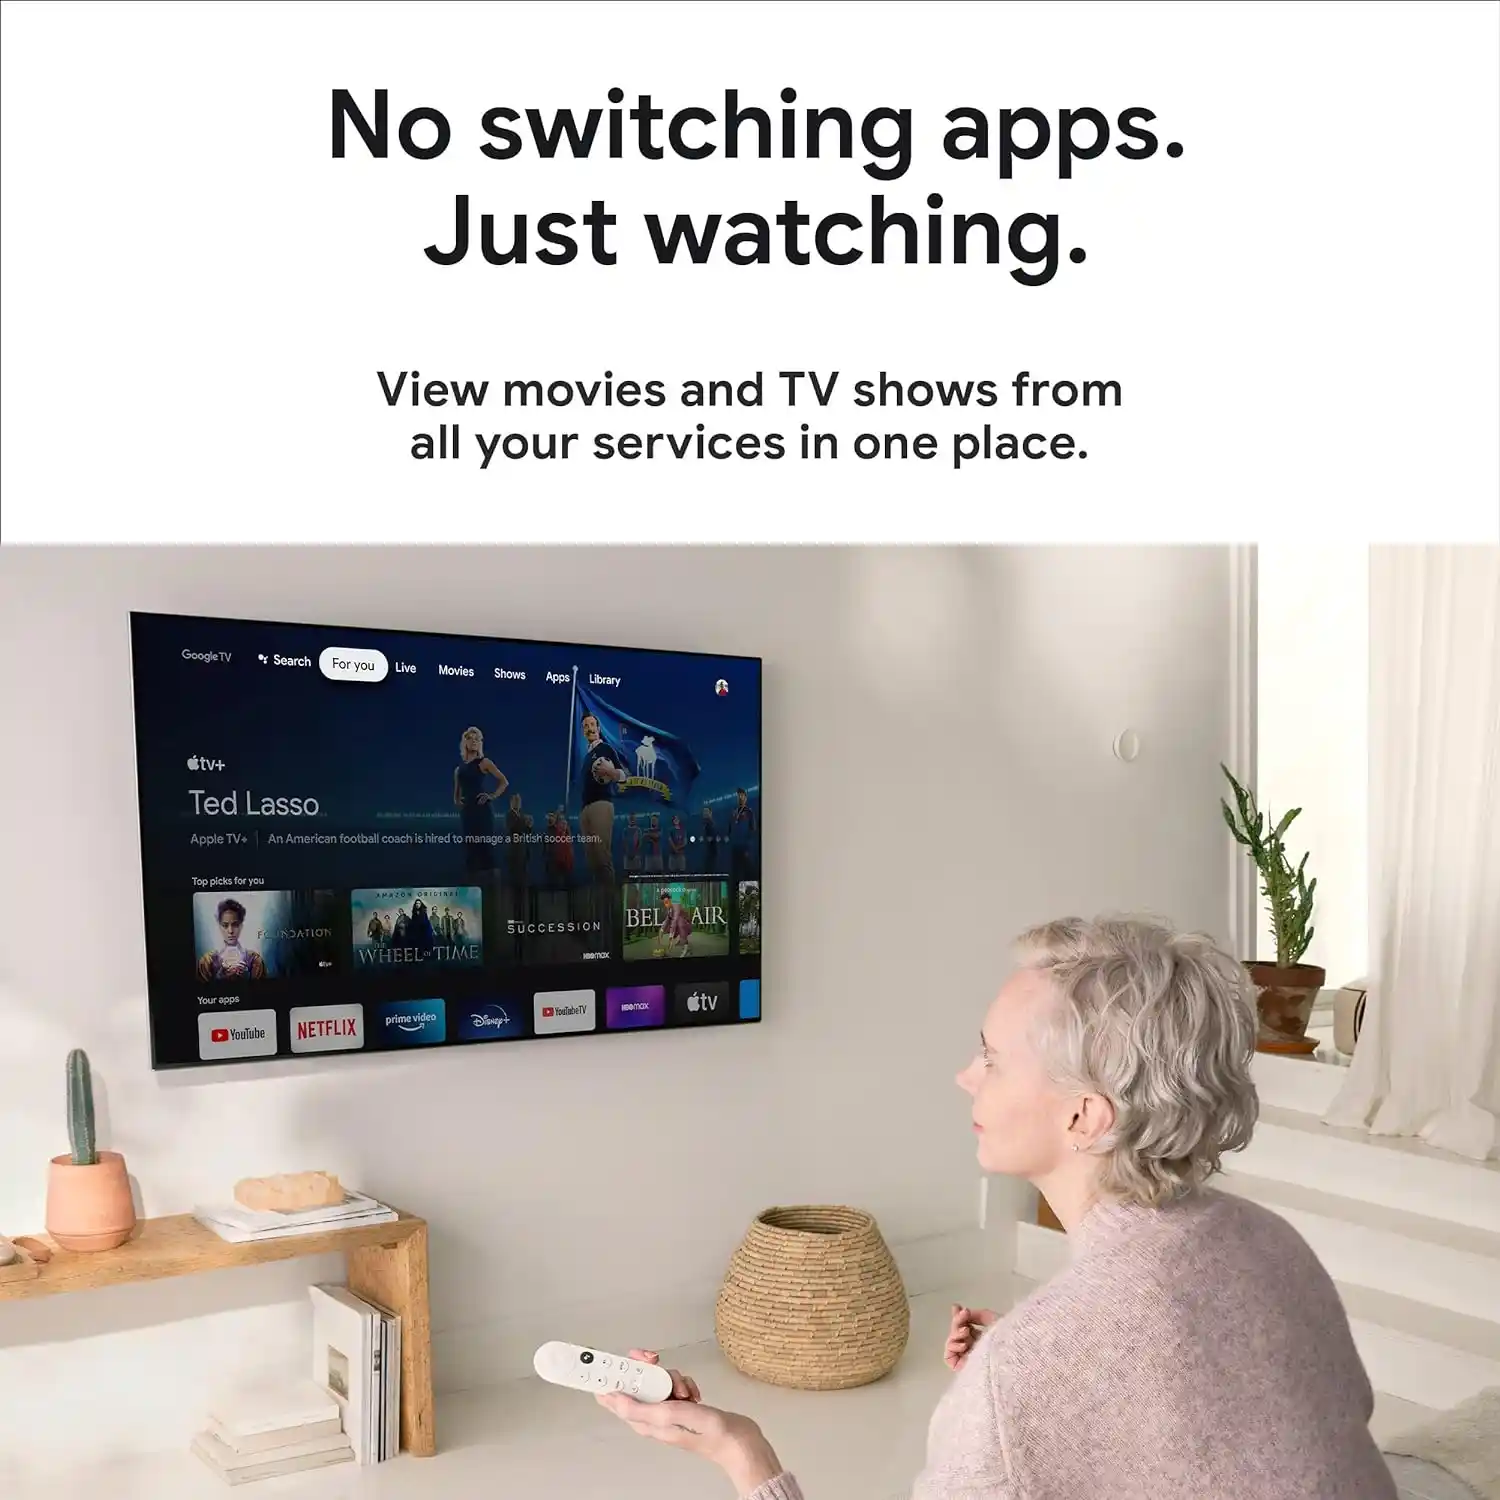 high-quality streaming experience that is easy to control and set up. With its user-friendly interface and powerful features, it’s an excellent addition to any home entertainment system.